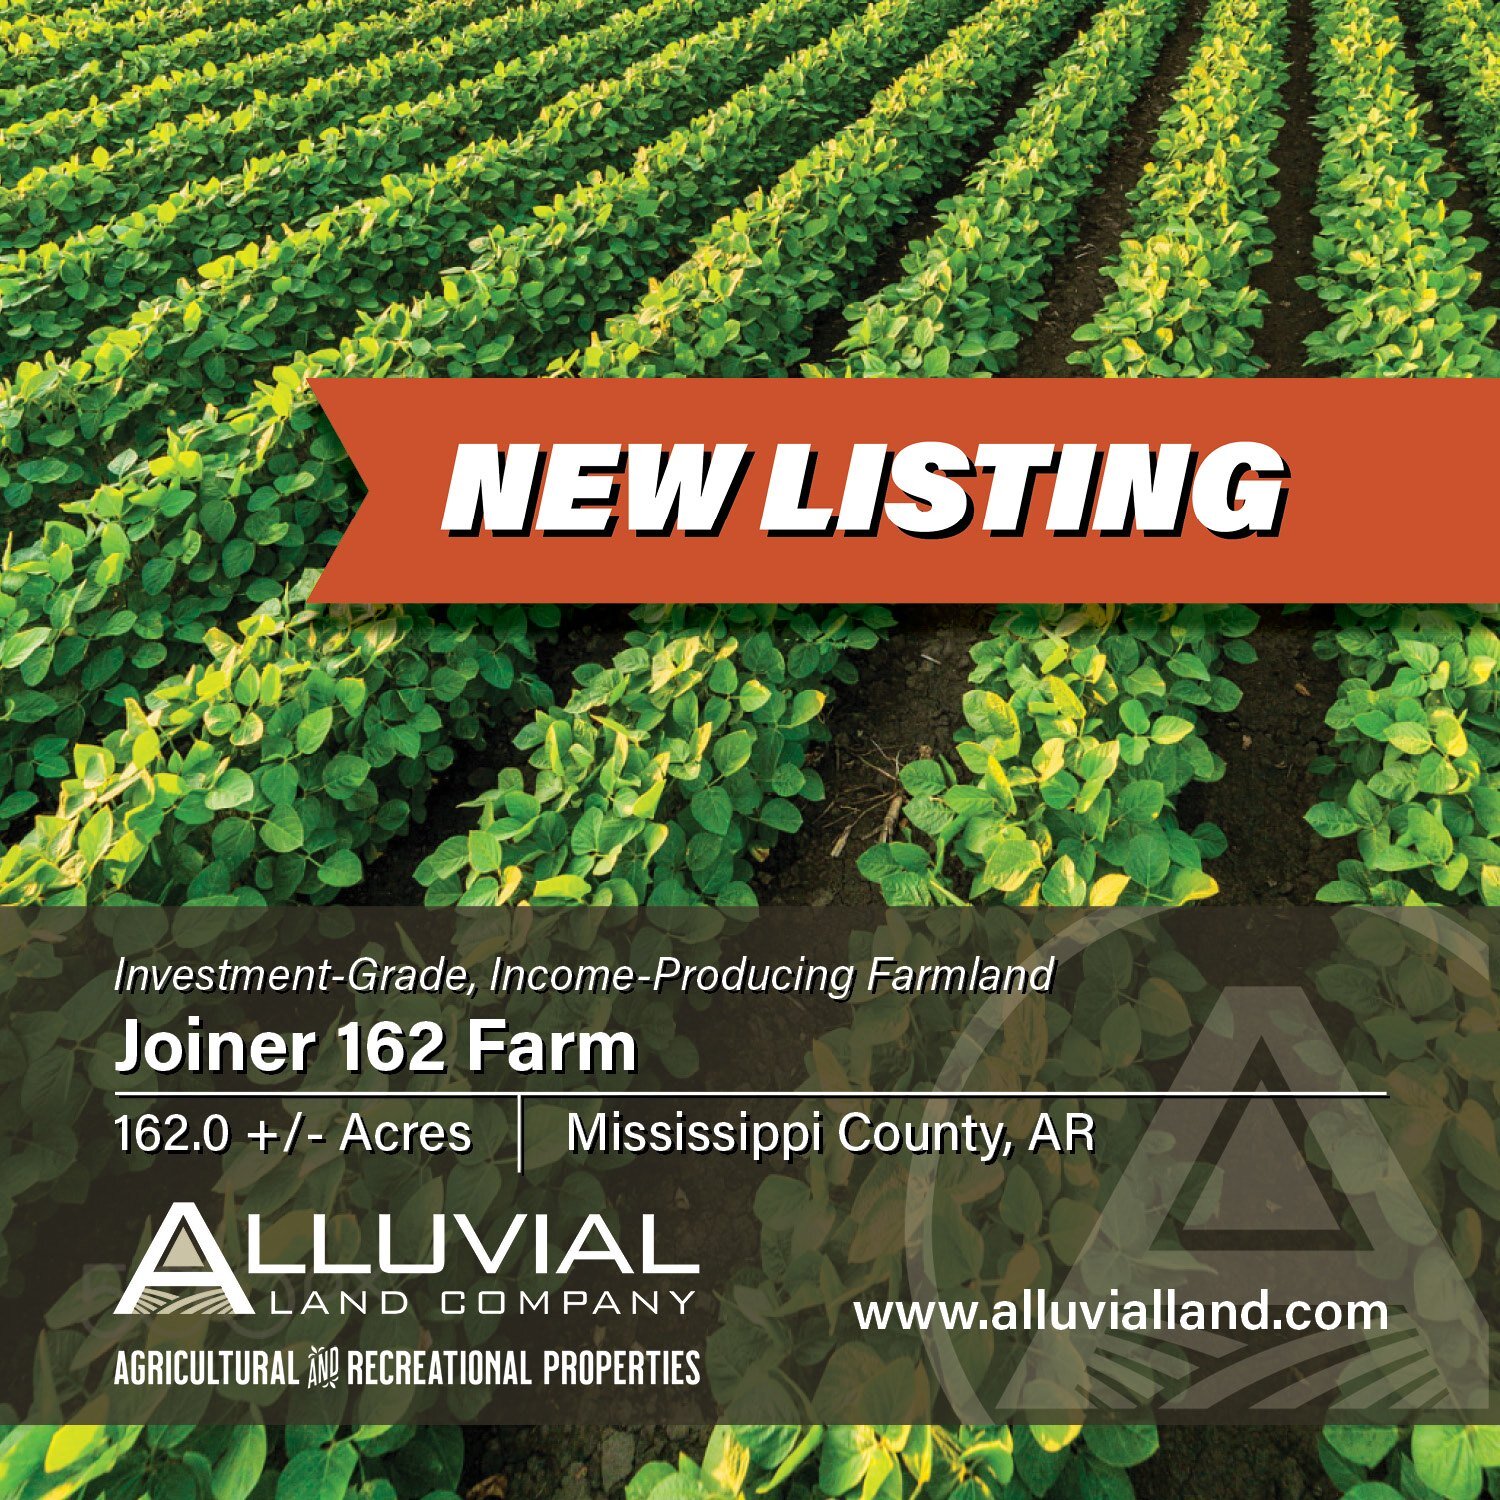 NEW LISTING
The Joiner 162 Farm consists of 162.0 +/- total acres of investment-grade, income-producing farmland in Northeast Arkansas (Mississippi County), just off I-55 and two miles west of the town of Joiner. 150.55 +/- acres are leveled, tillabl